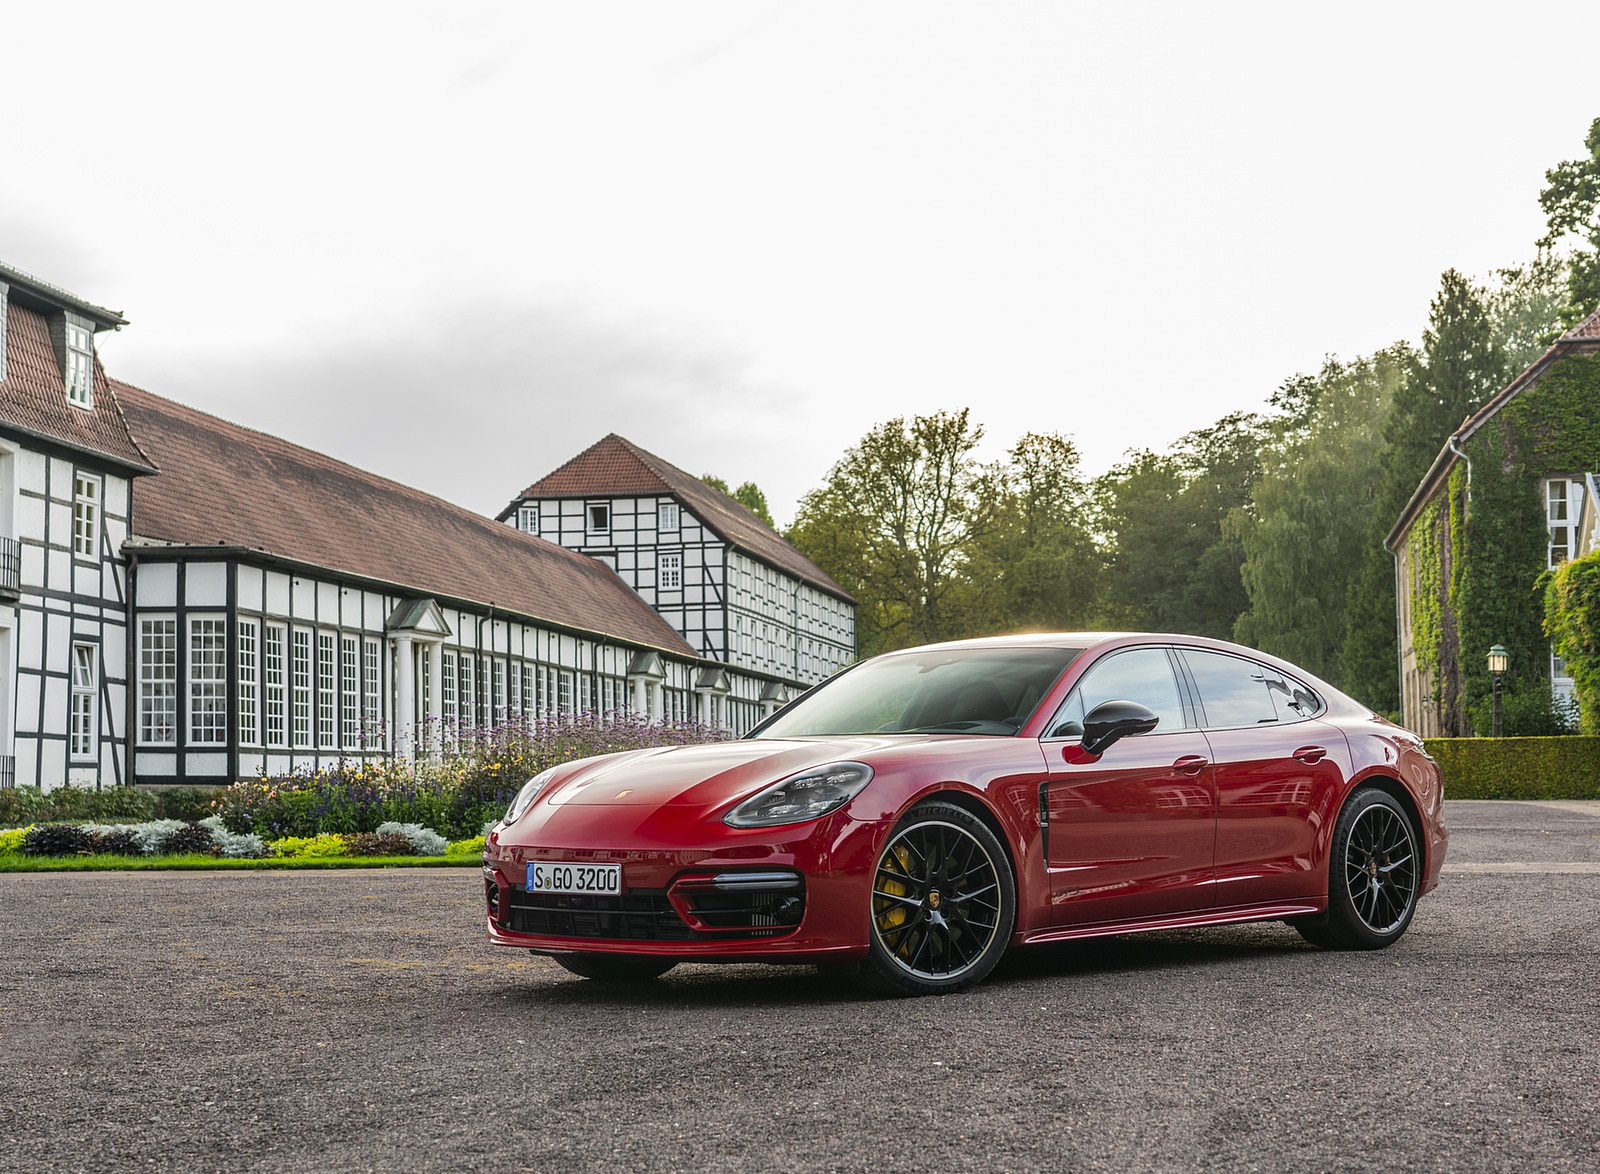 2021 Porsche Panamera GTS (Color: Carmine Red) Front Three-Quarter Wallpapers  #42 of 117